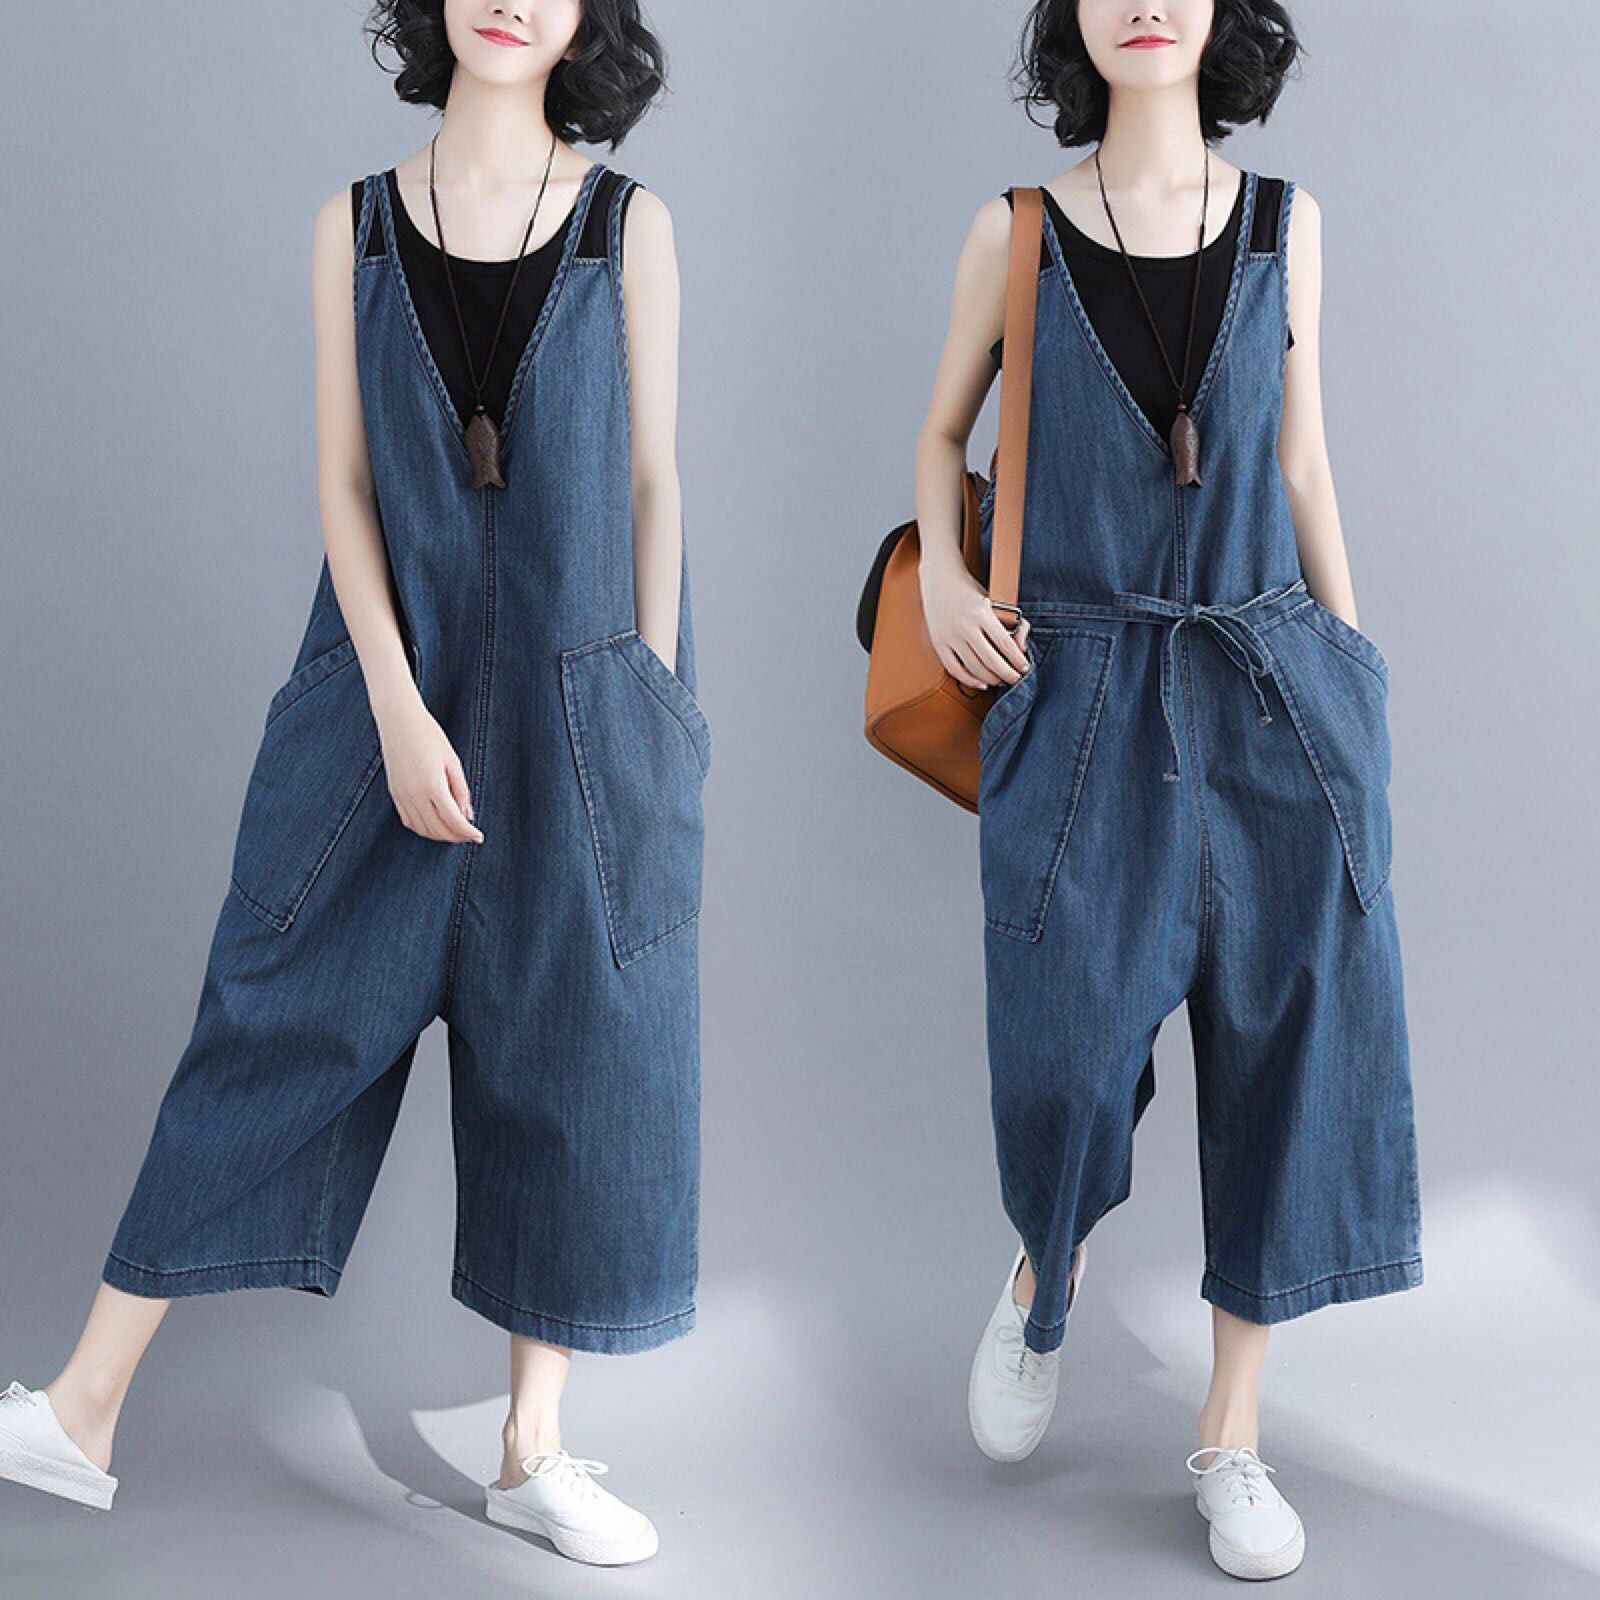 #4025 Spring Autumn V-neck Sleeveless Woman Jean Jumpsuit Solid Loose Overalls Ladise Fashion Wide Leg Big Size Jumpsuit Lady 1